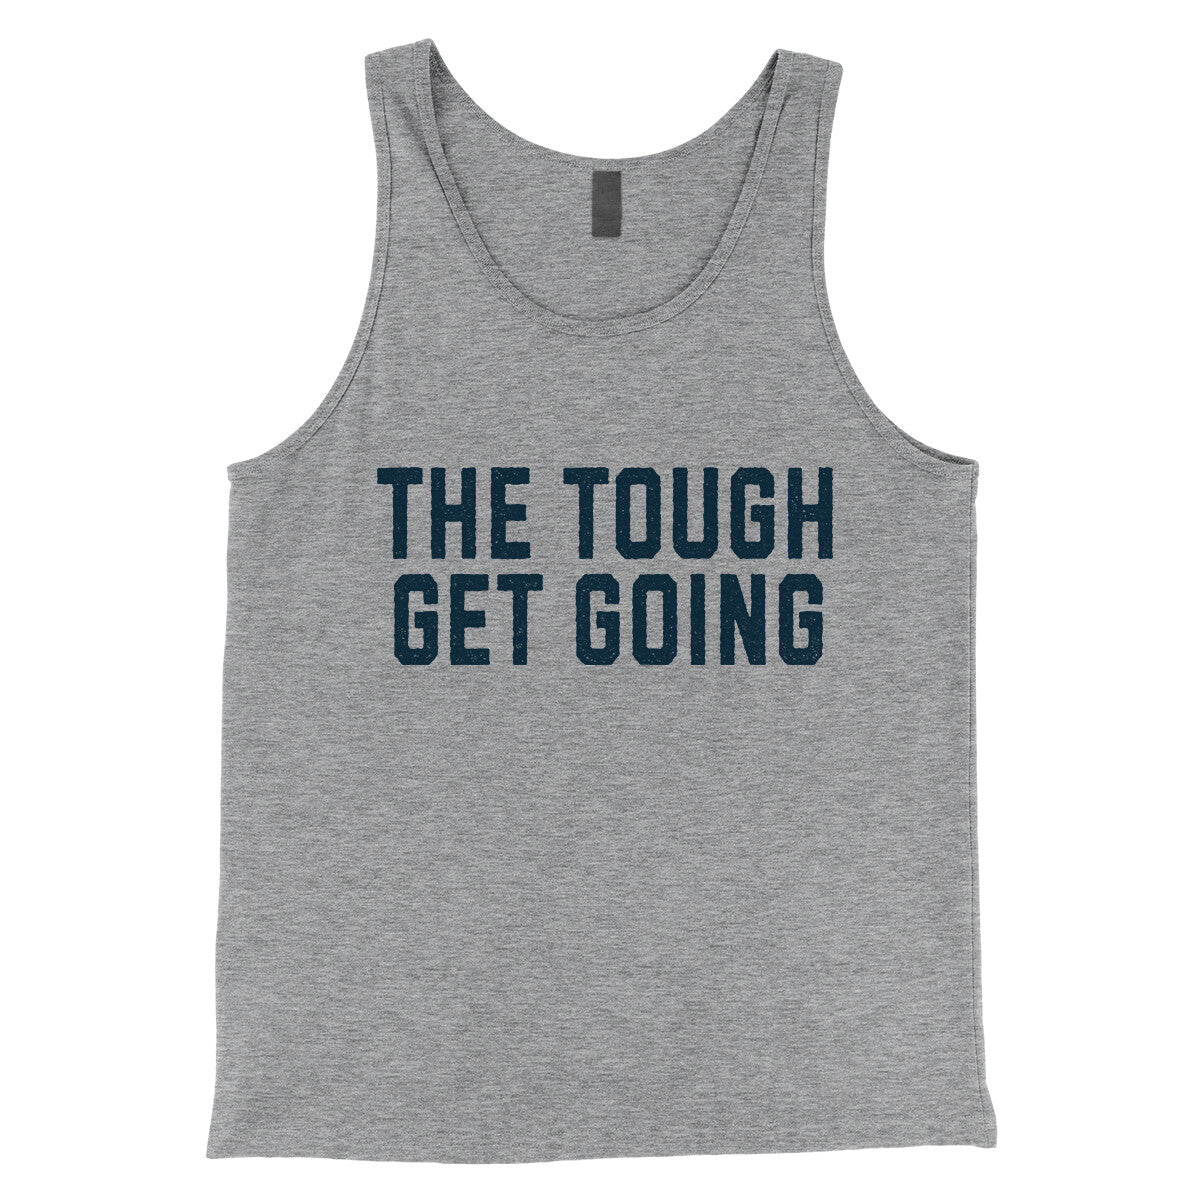 The Tough Get Going in Athletic Heather Color